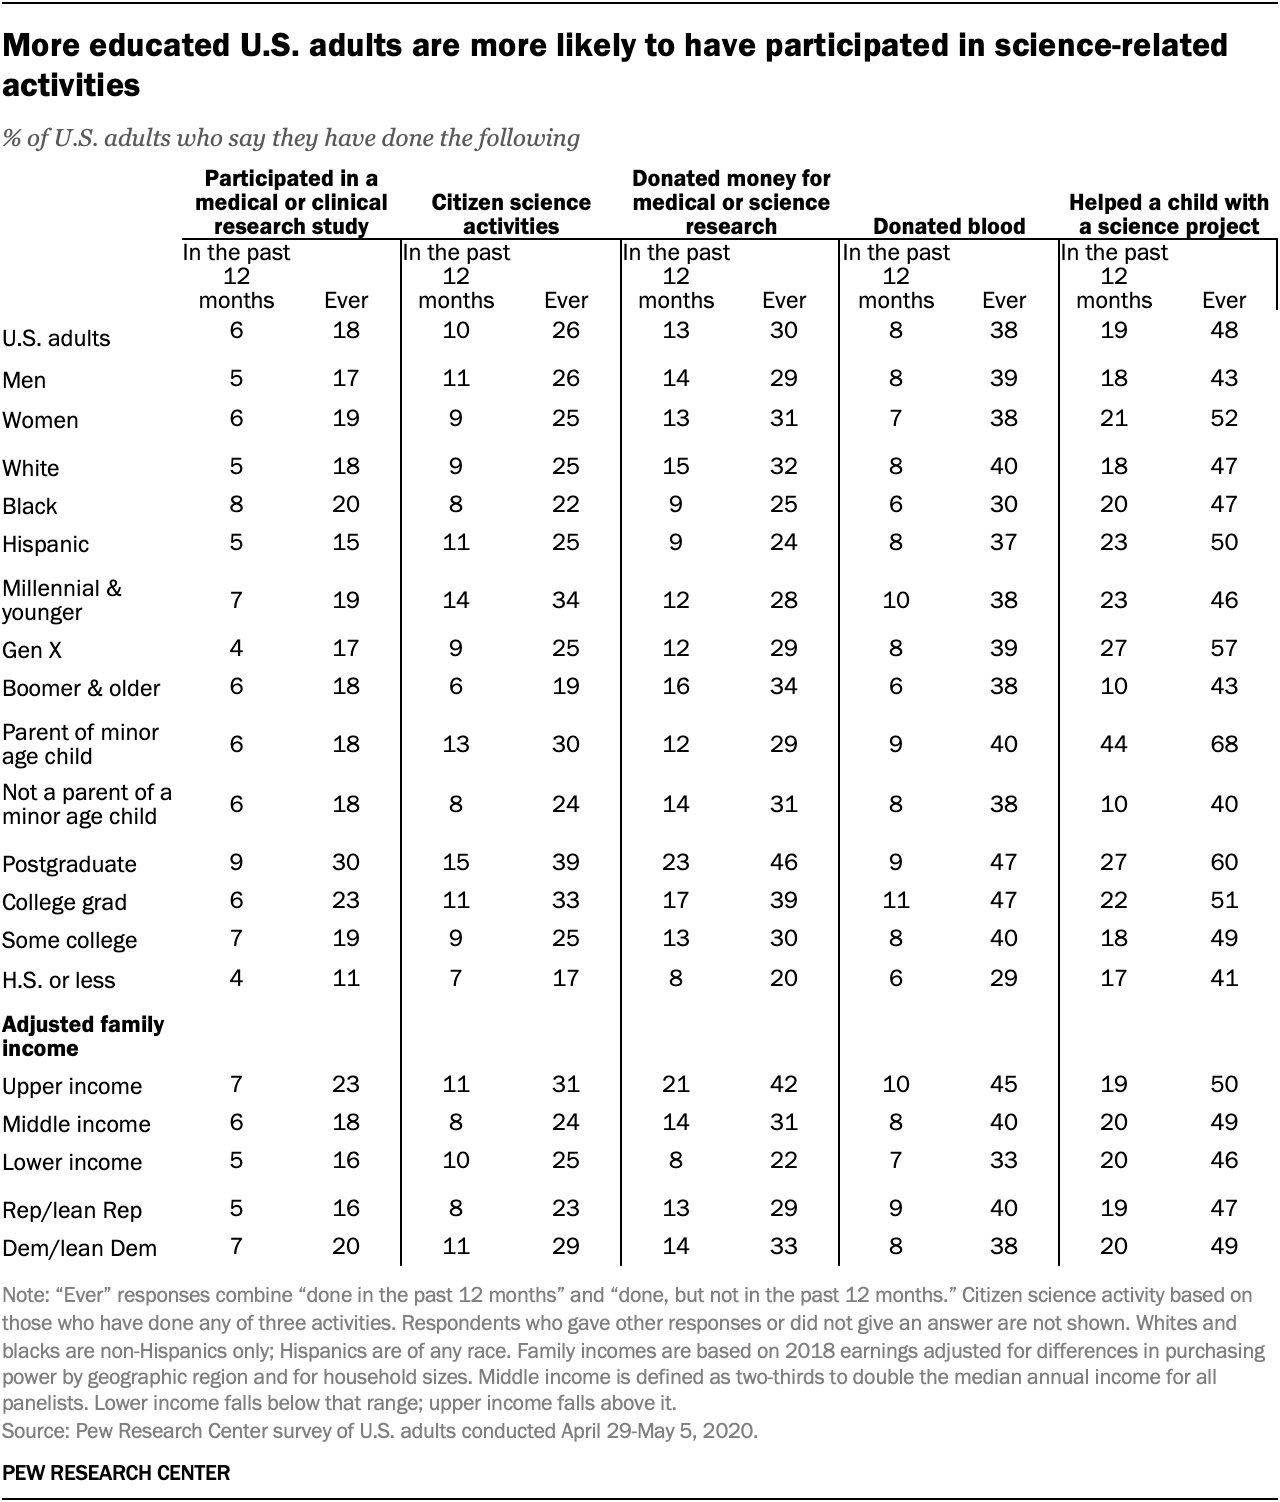 More educated U.S. adults are more likely to have participated in science-related activities